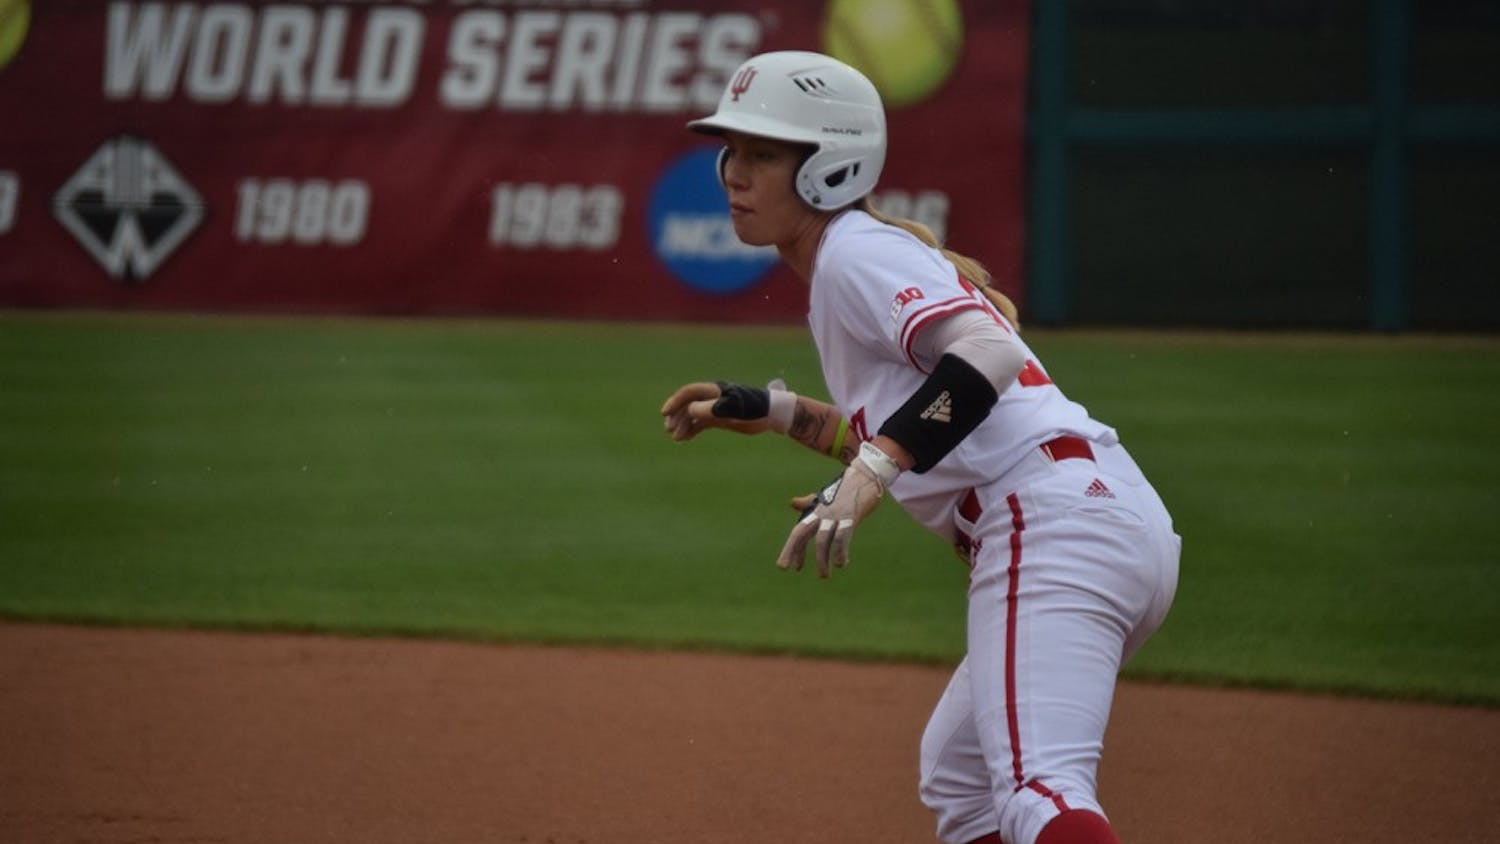 Junior shortstop Rachel O'Malley takes a lead off first base after drawing a&nbsp;walk. The Hoosiers defeated the Terrapins in all three games in Bloomington.